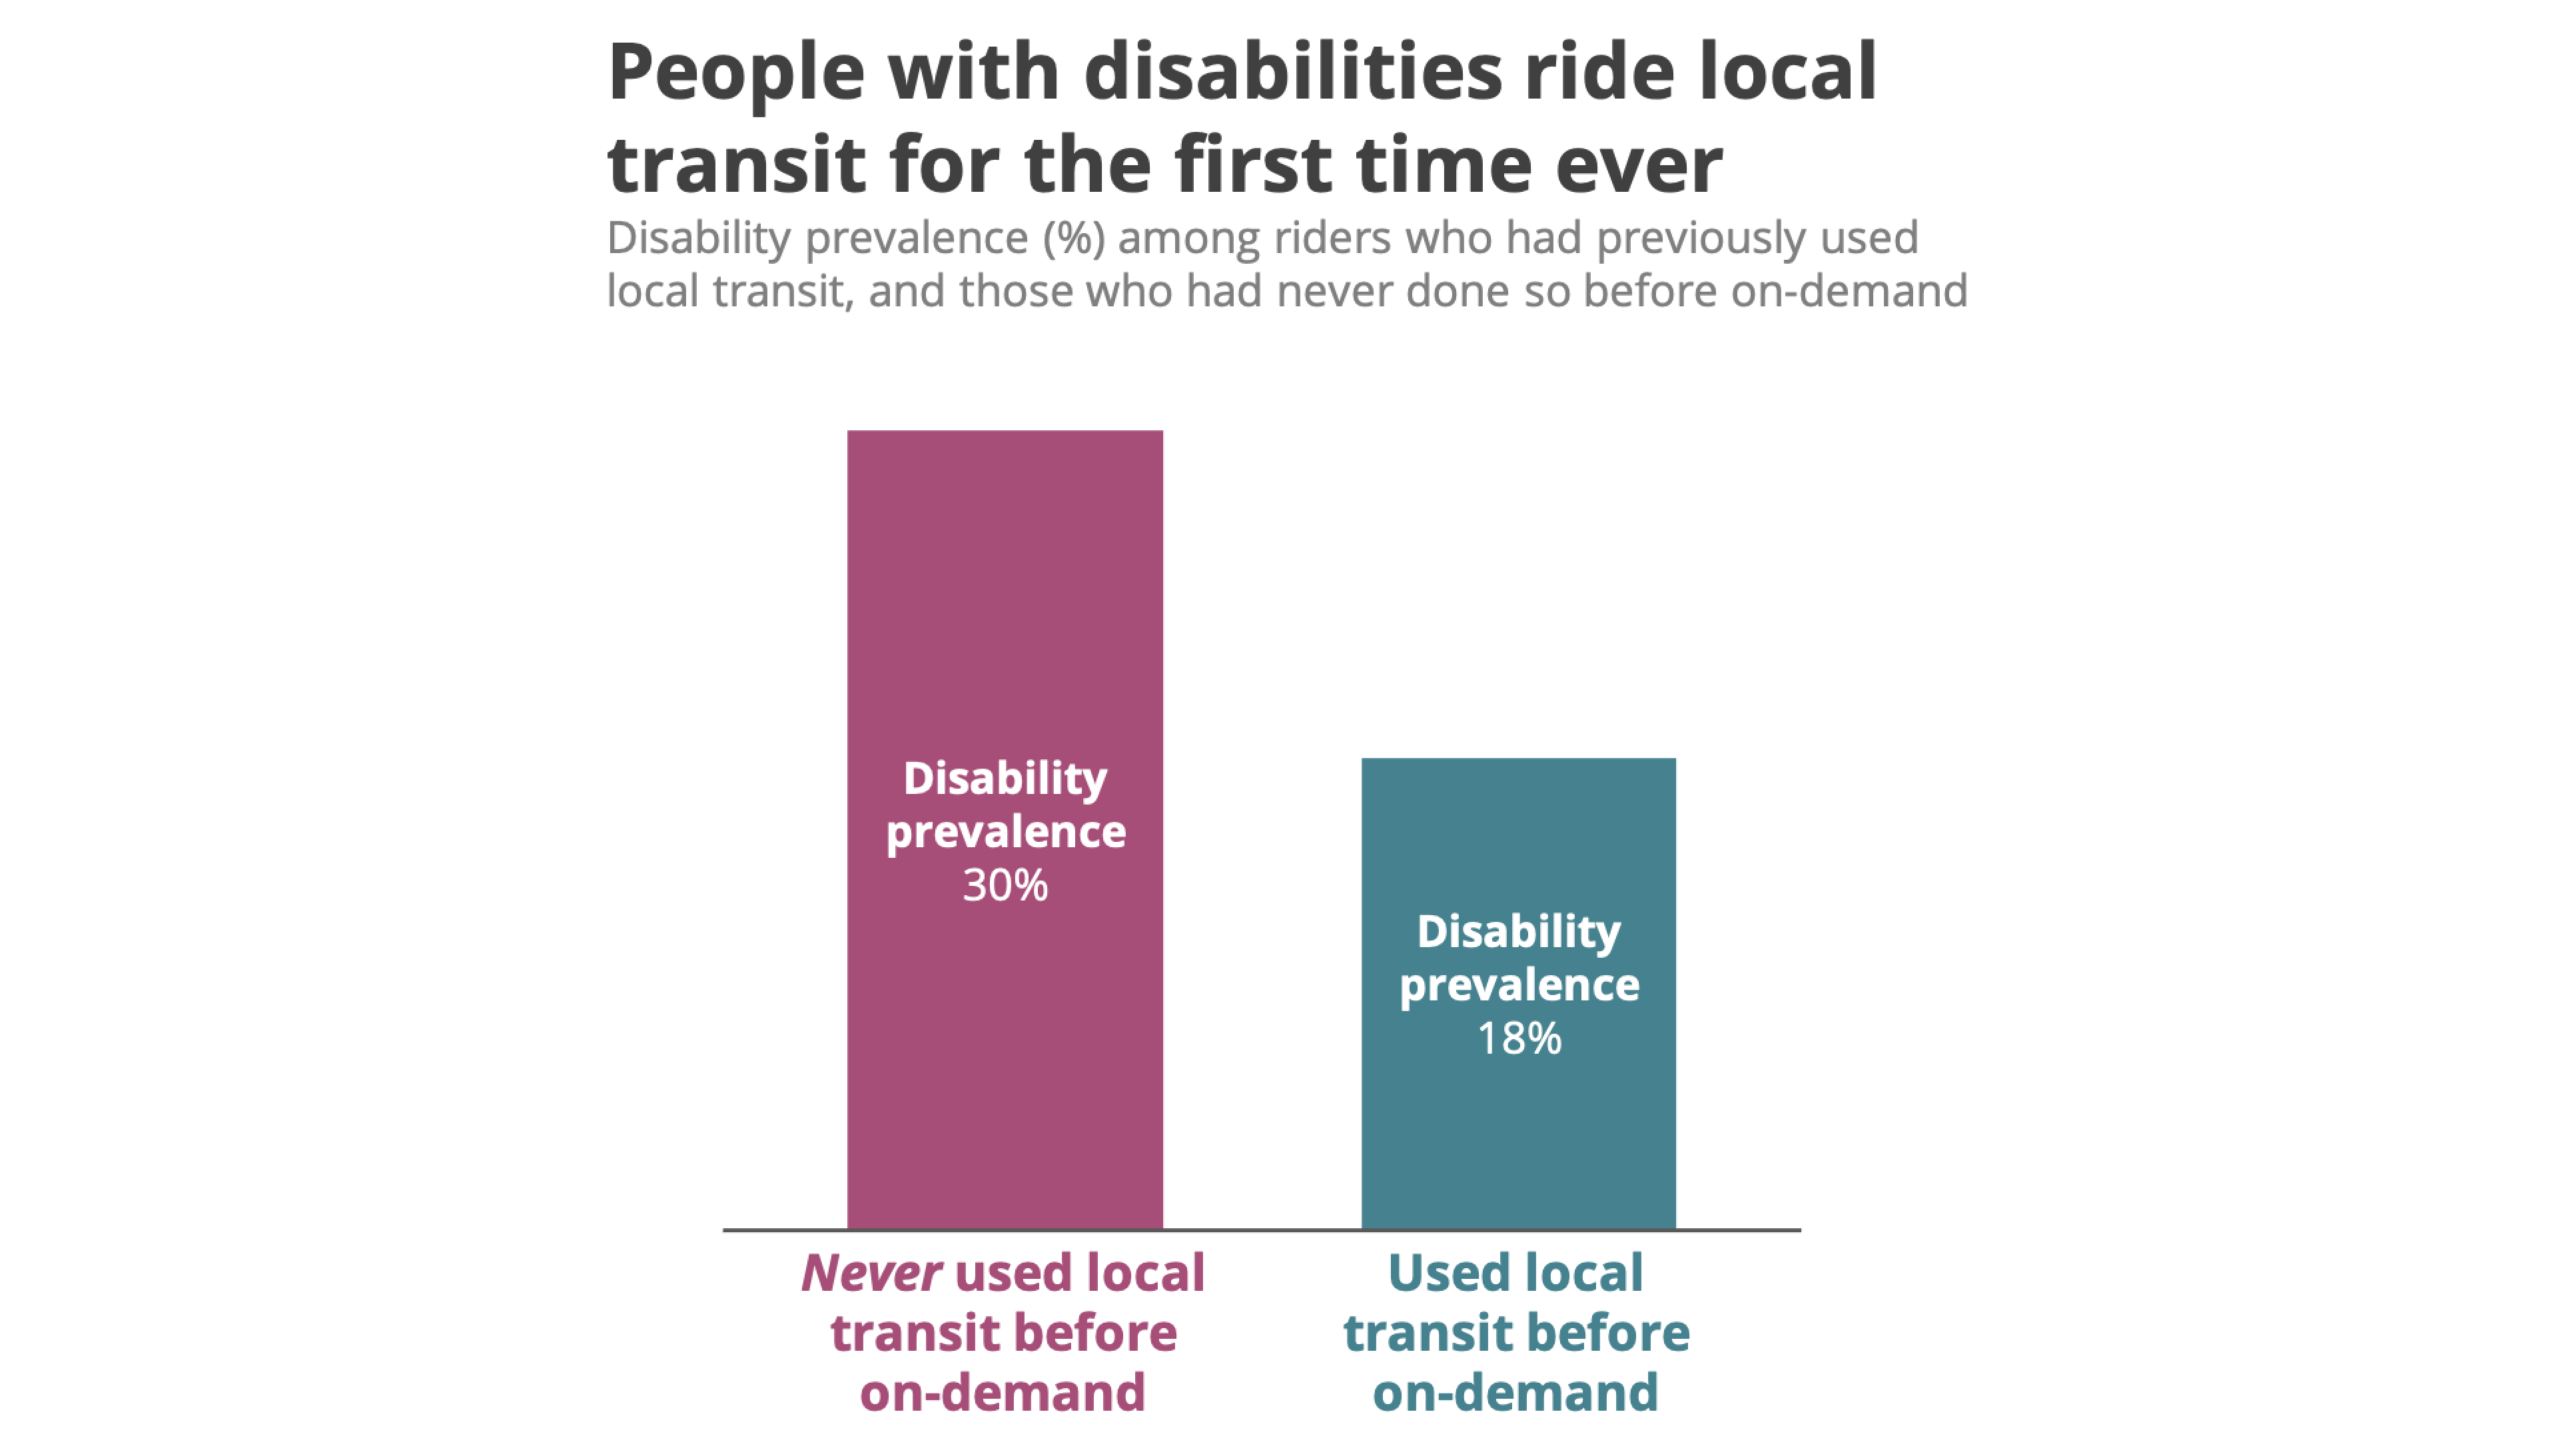 People with disabilities ride local transit for the first time ever